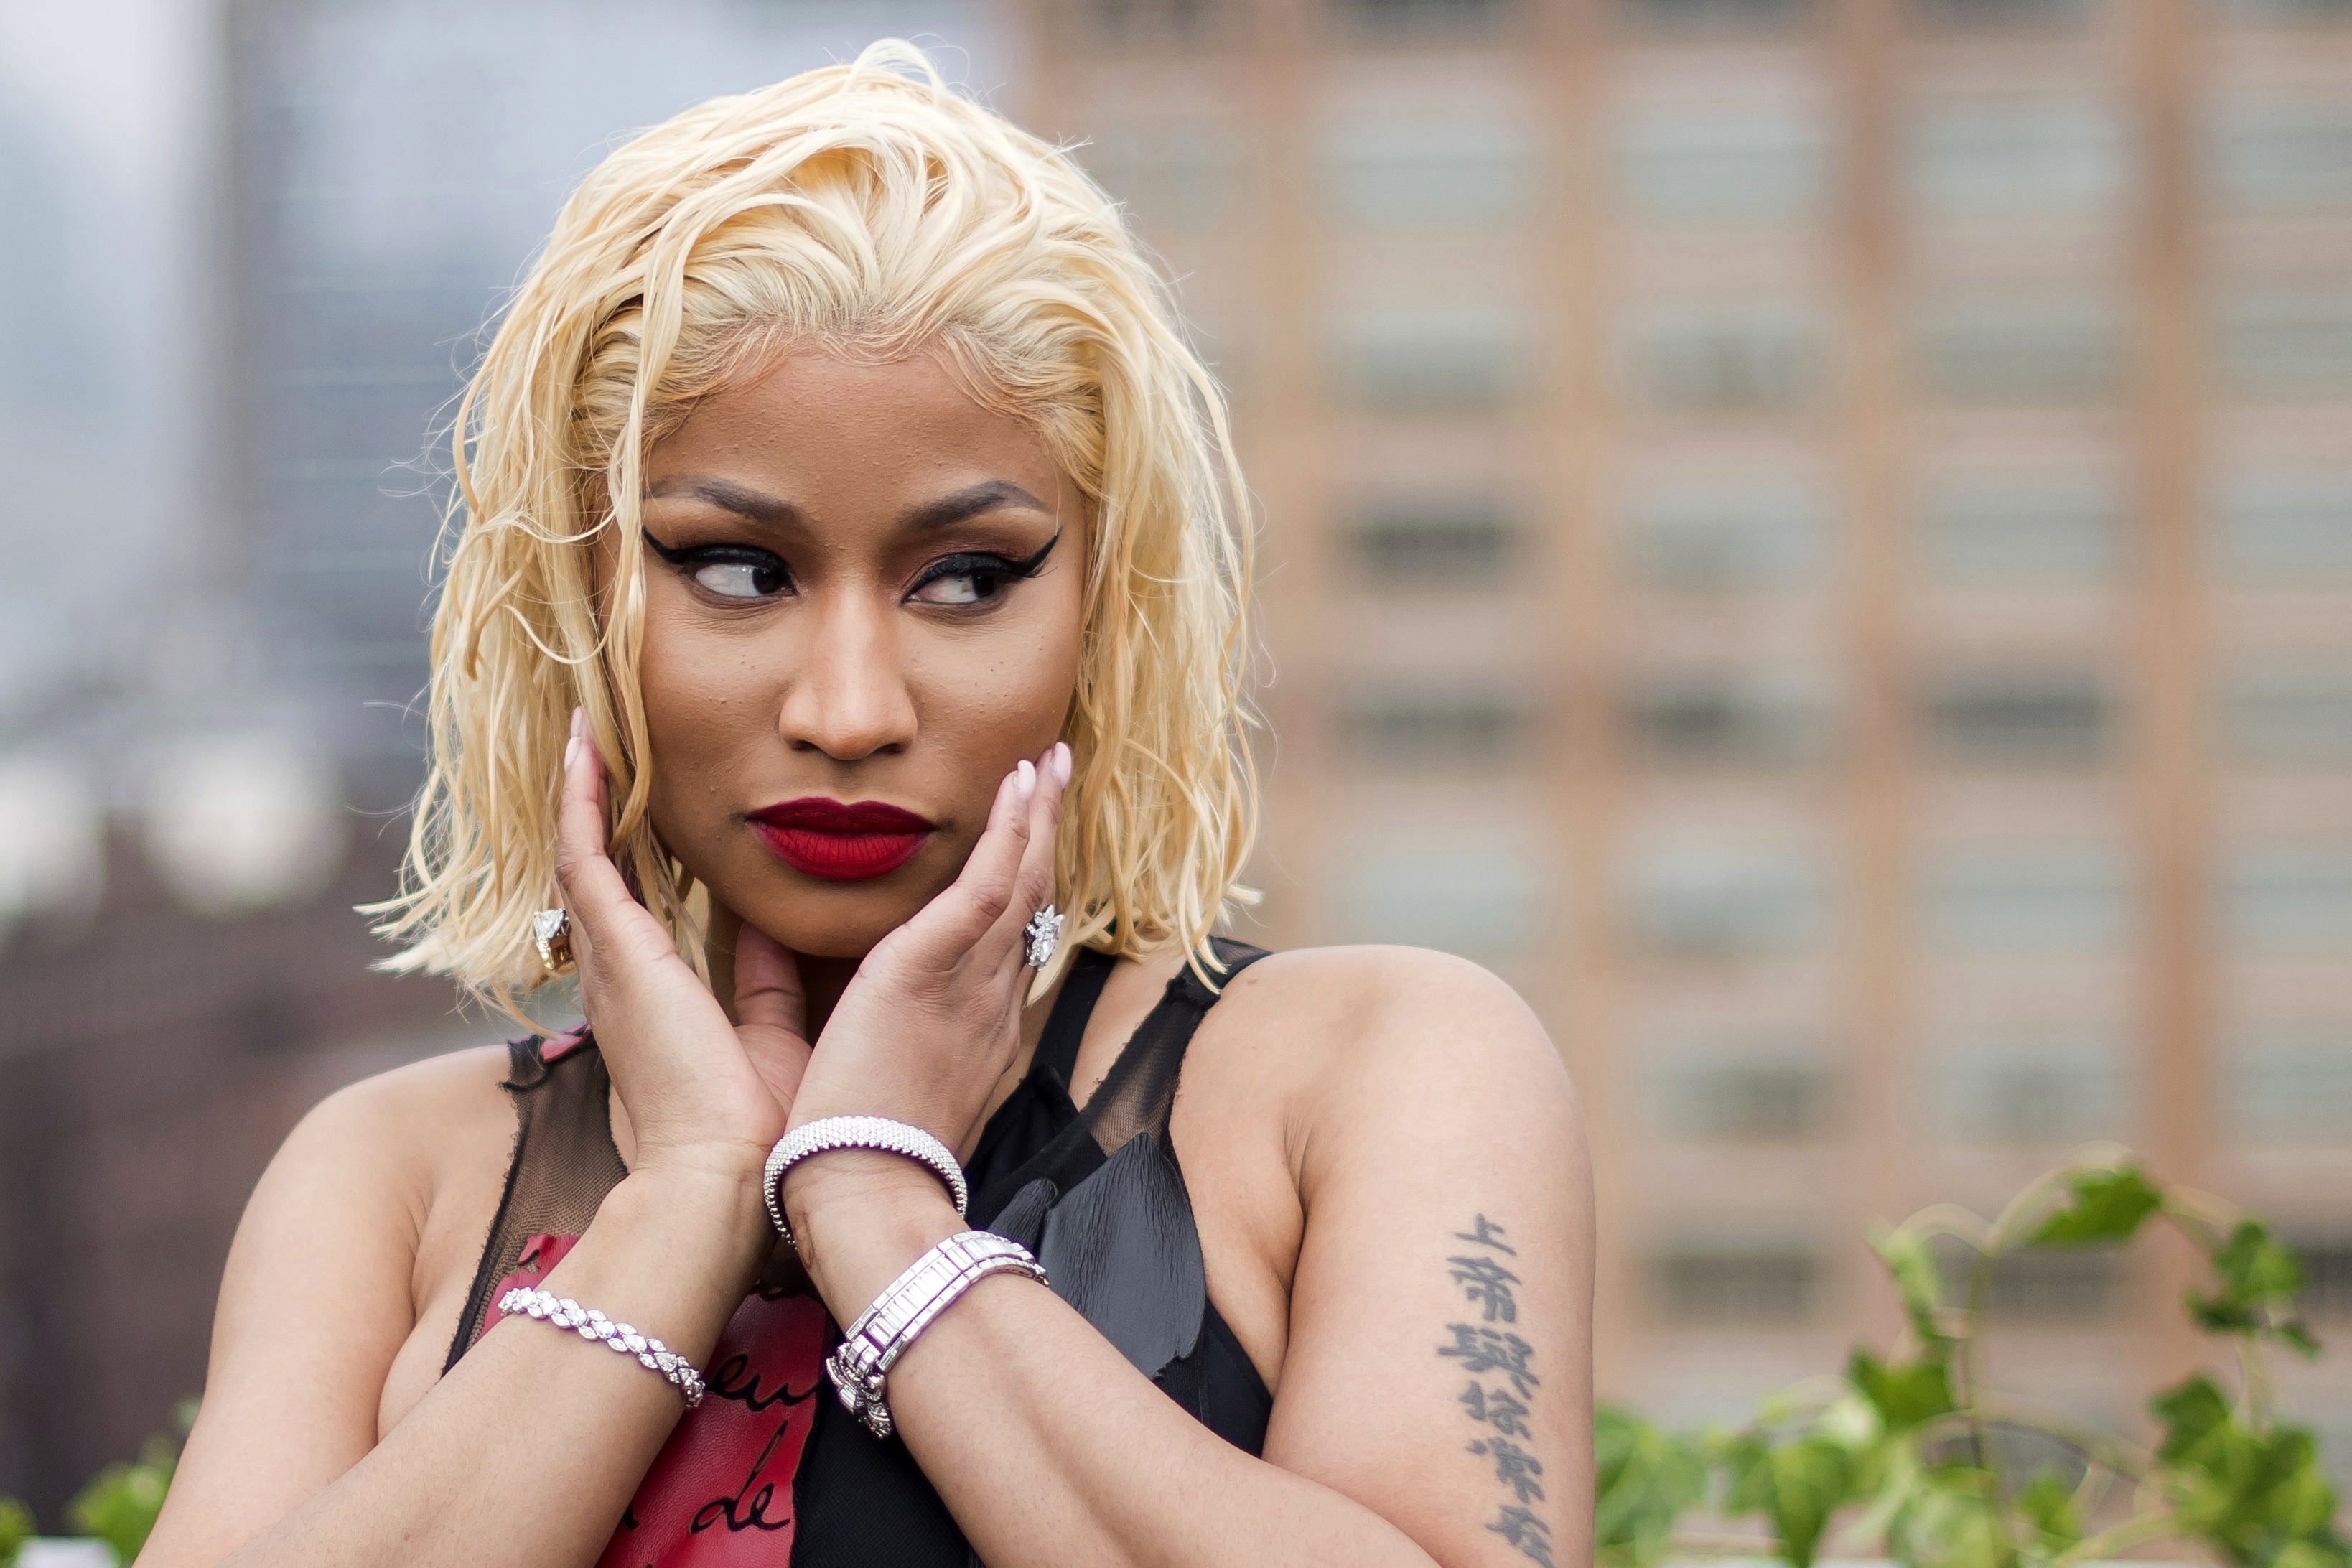 Stanford Infectious Disease Expert Angered By Nicki Minaj’s COVID Vaccination Tweets